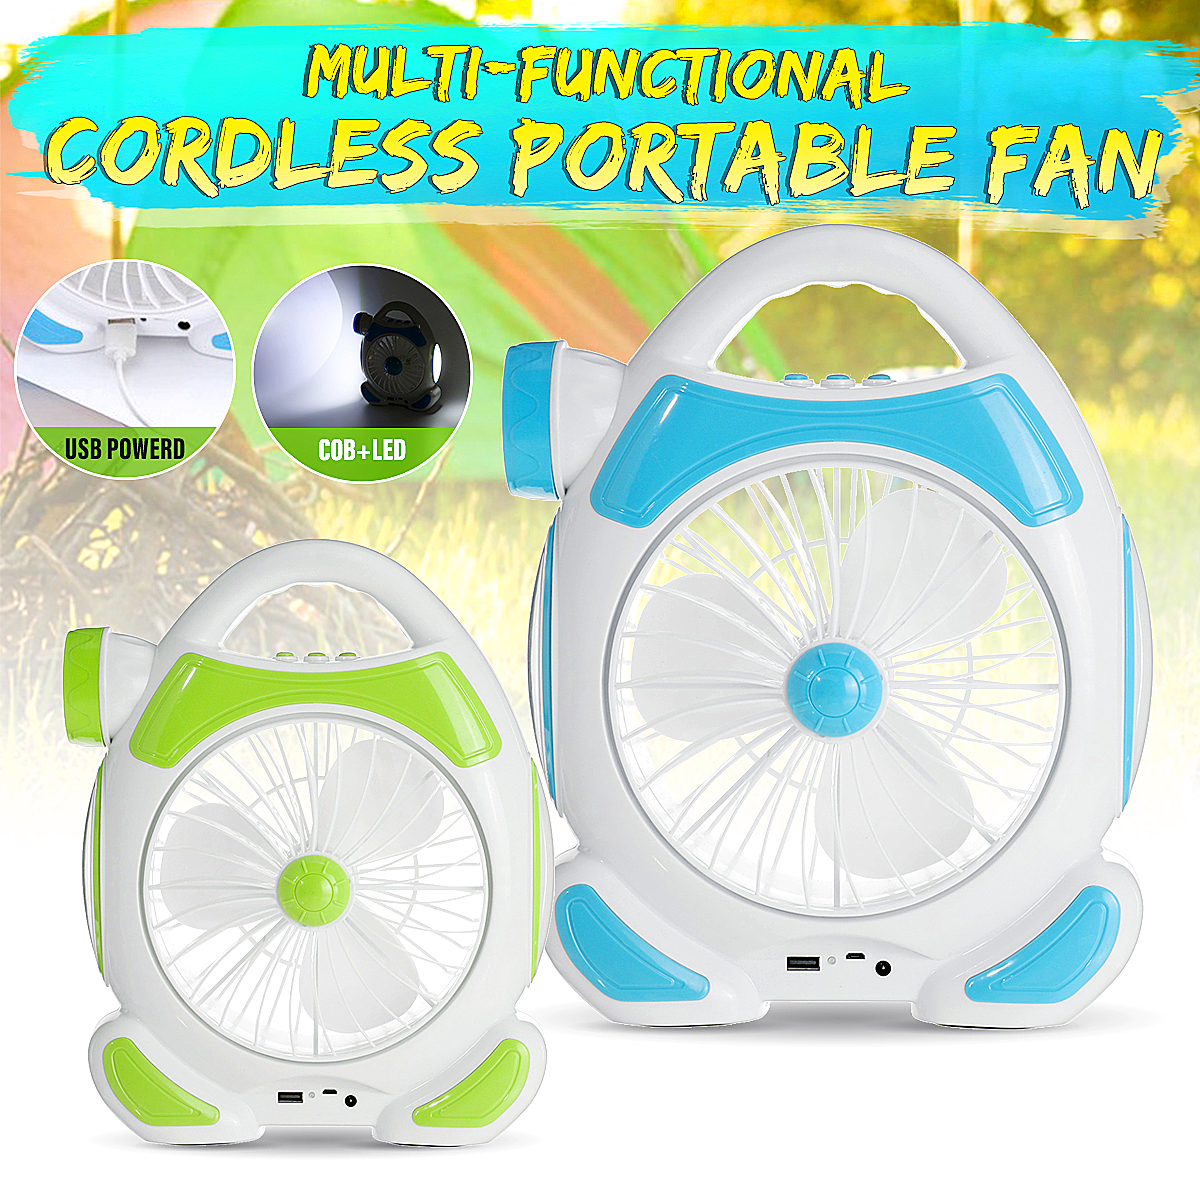 2-IN-1 Cordless Multi-functional USB Charging Fan with Emergency LED Light Outdoor Travel Camping Accessories